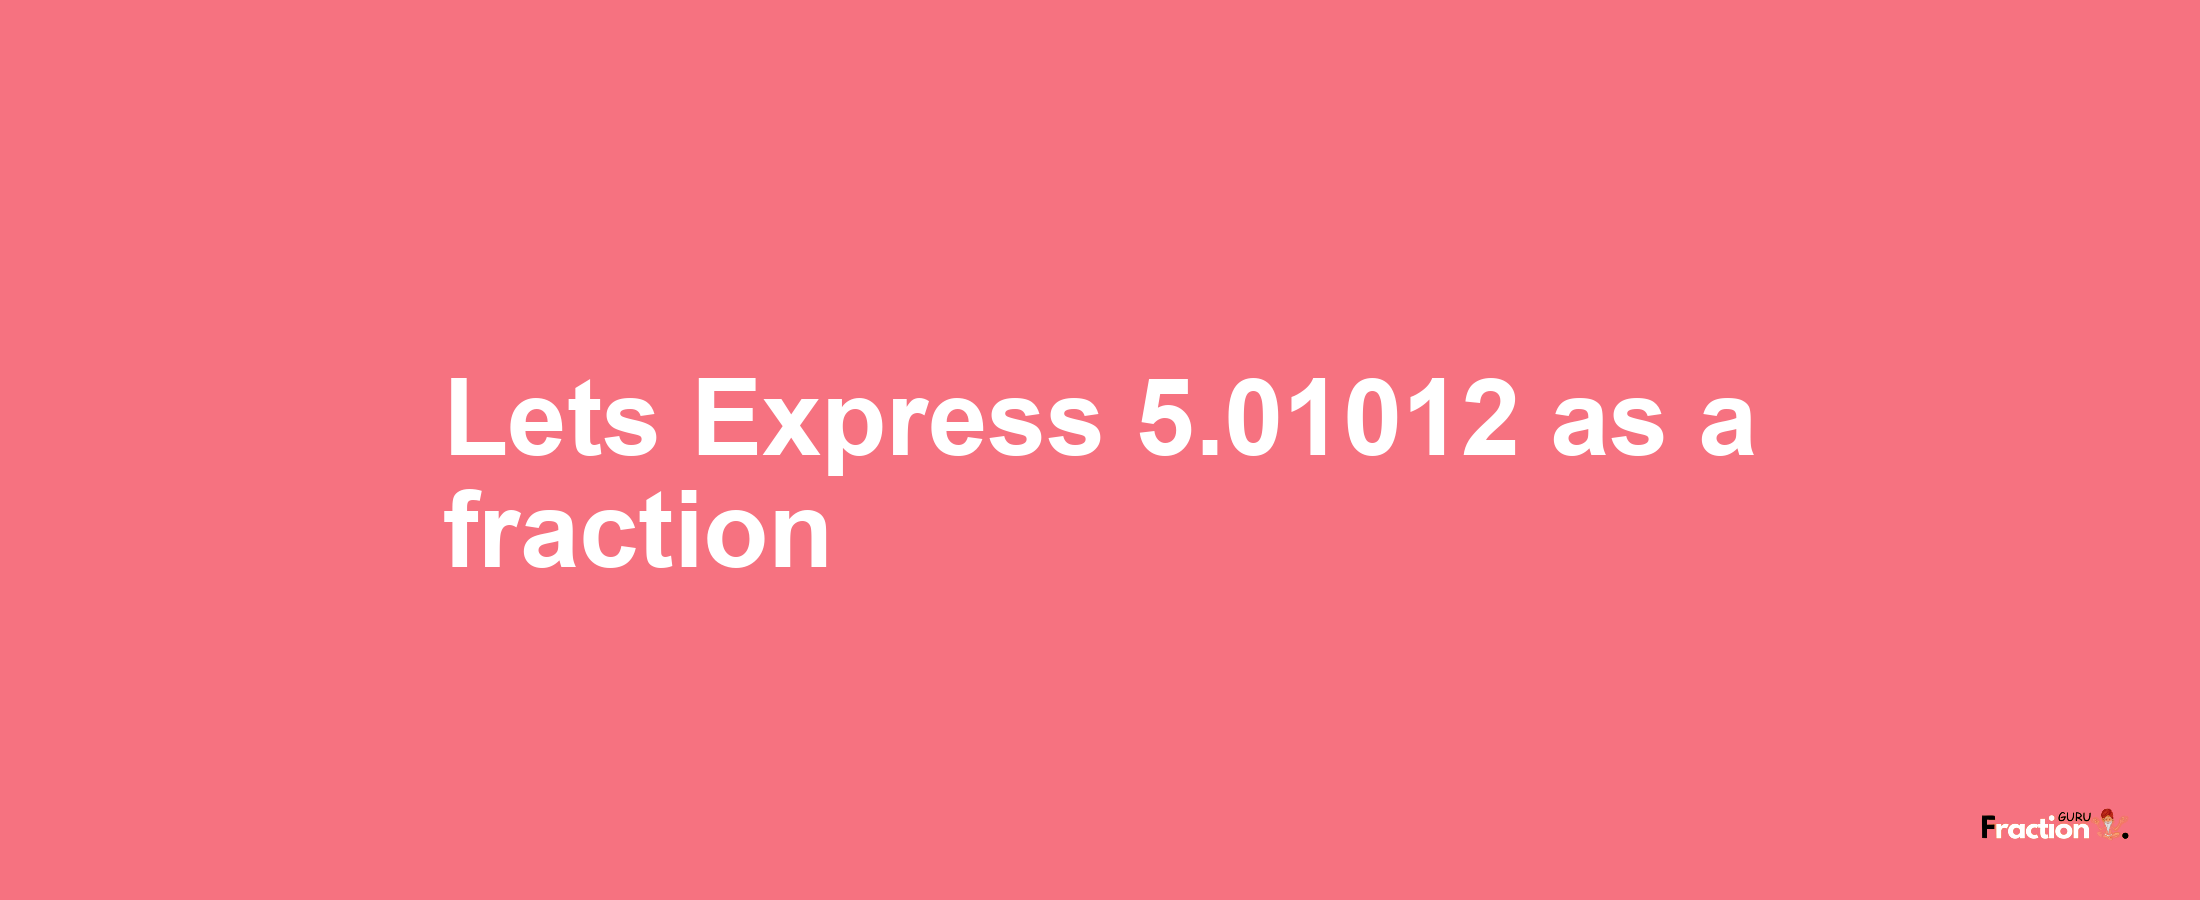 Lets Express 5.01012 as afraction